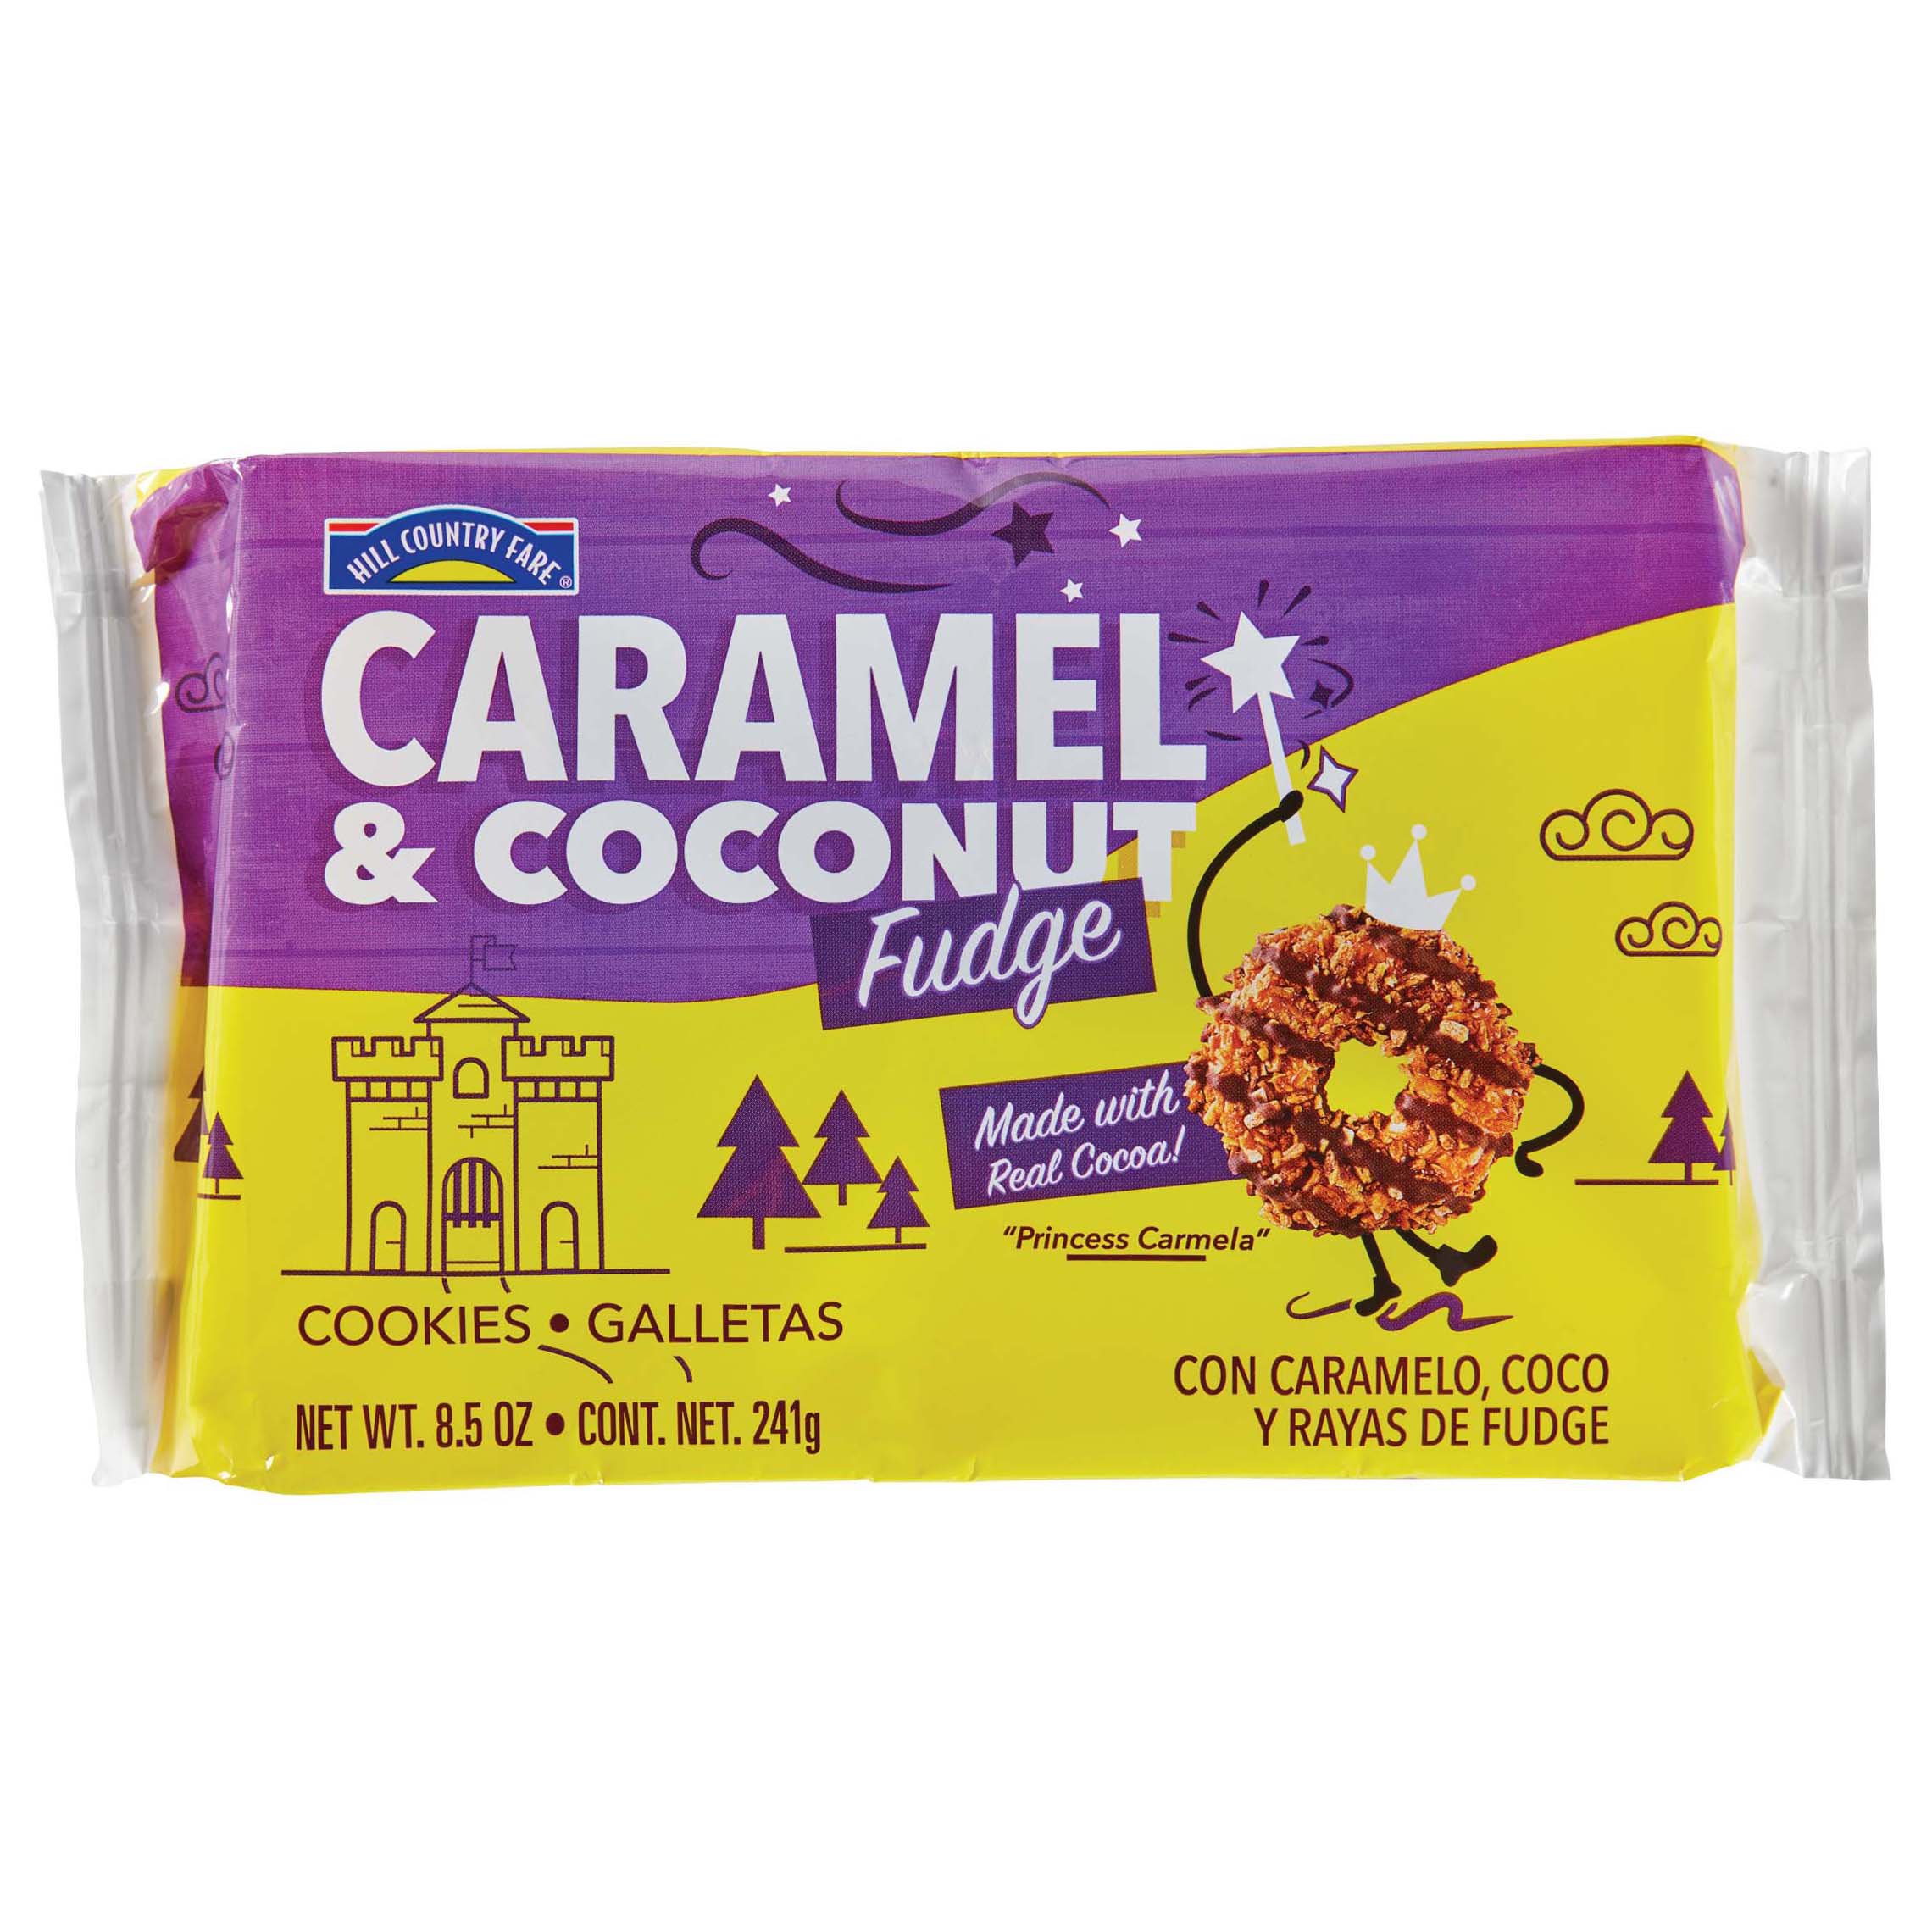 Hill Country Fare Caramel & Coconut Fudge Cookies - Shop Cookies at H-E-B